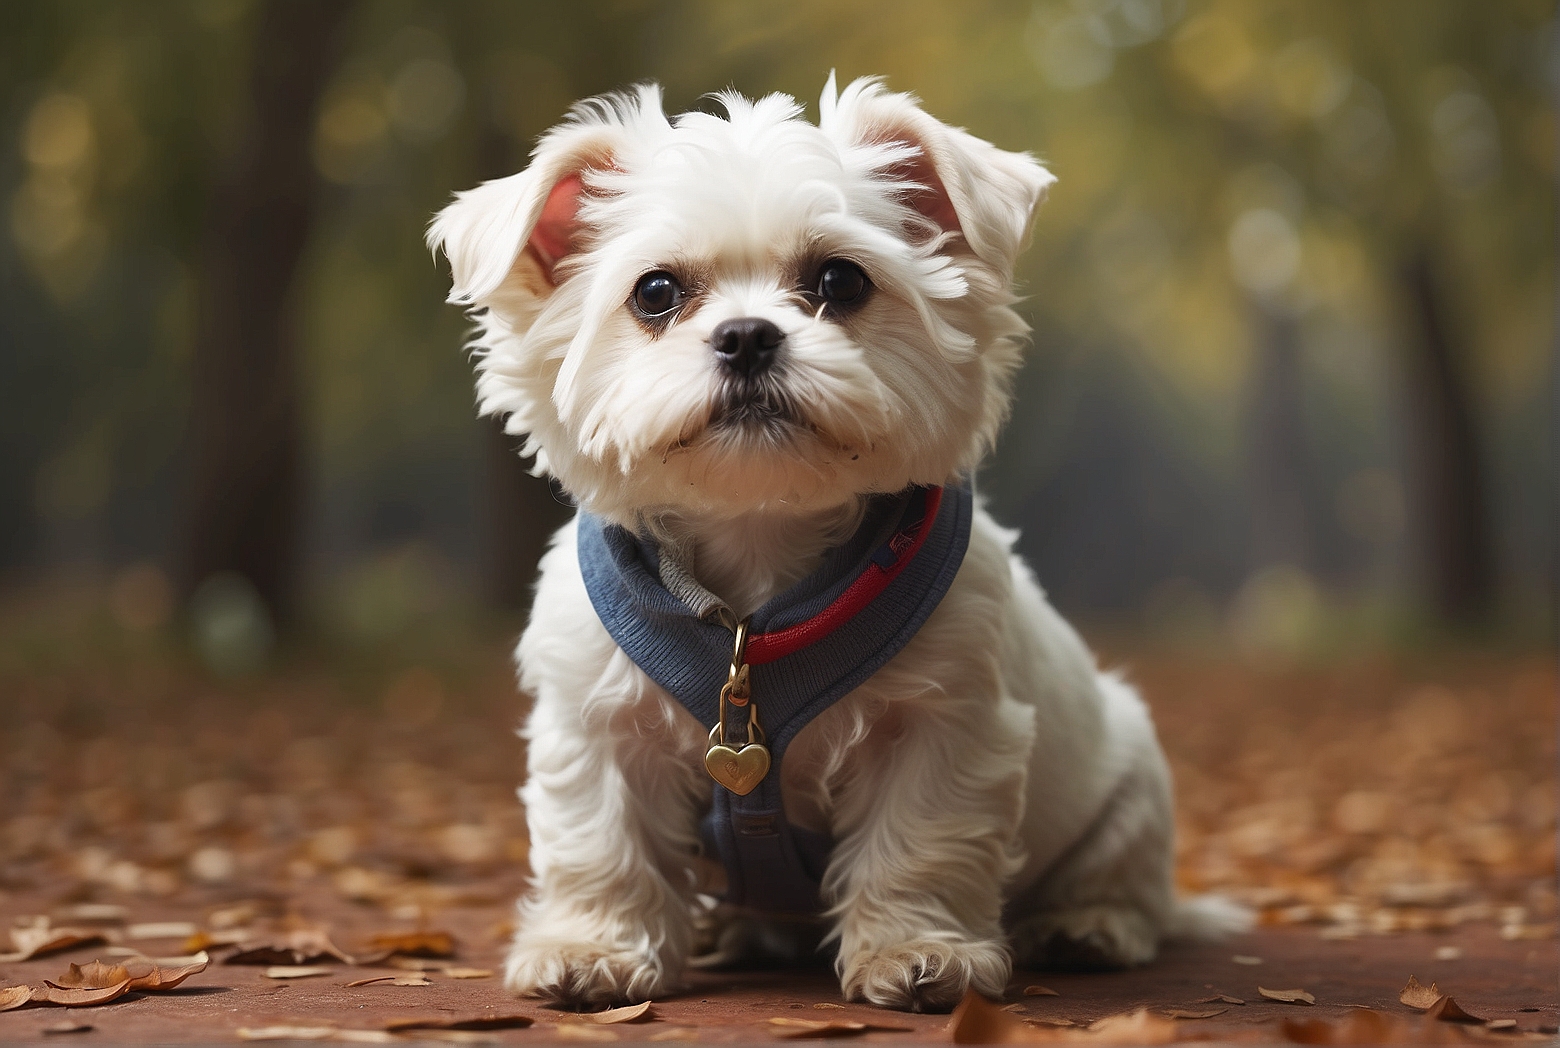 What is the average size of a Maltese dog?